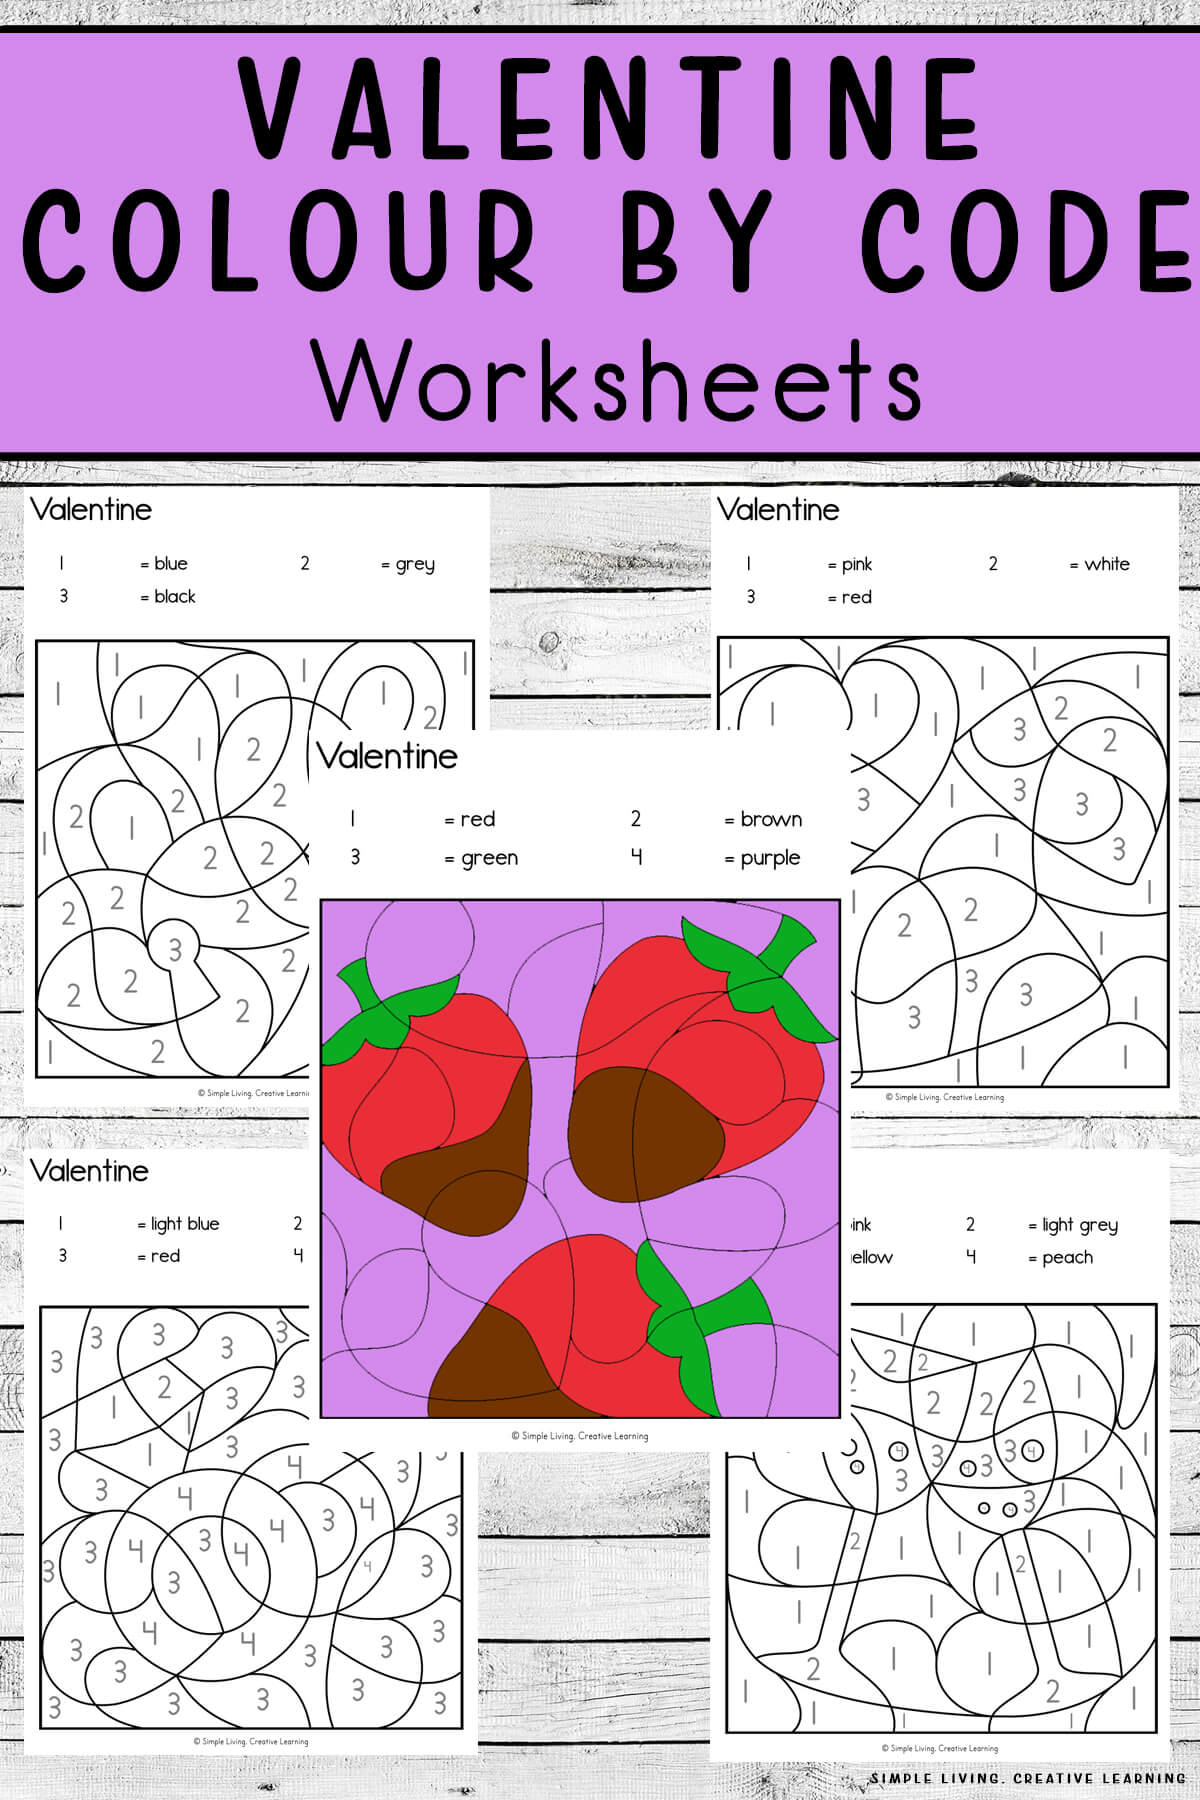 Valentine Colour By Code Worksheets